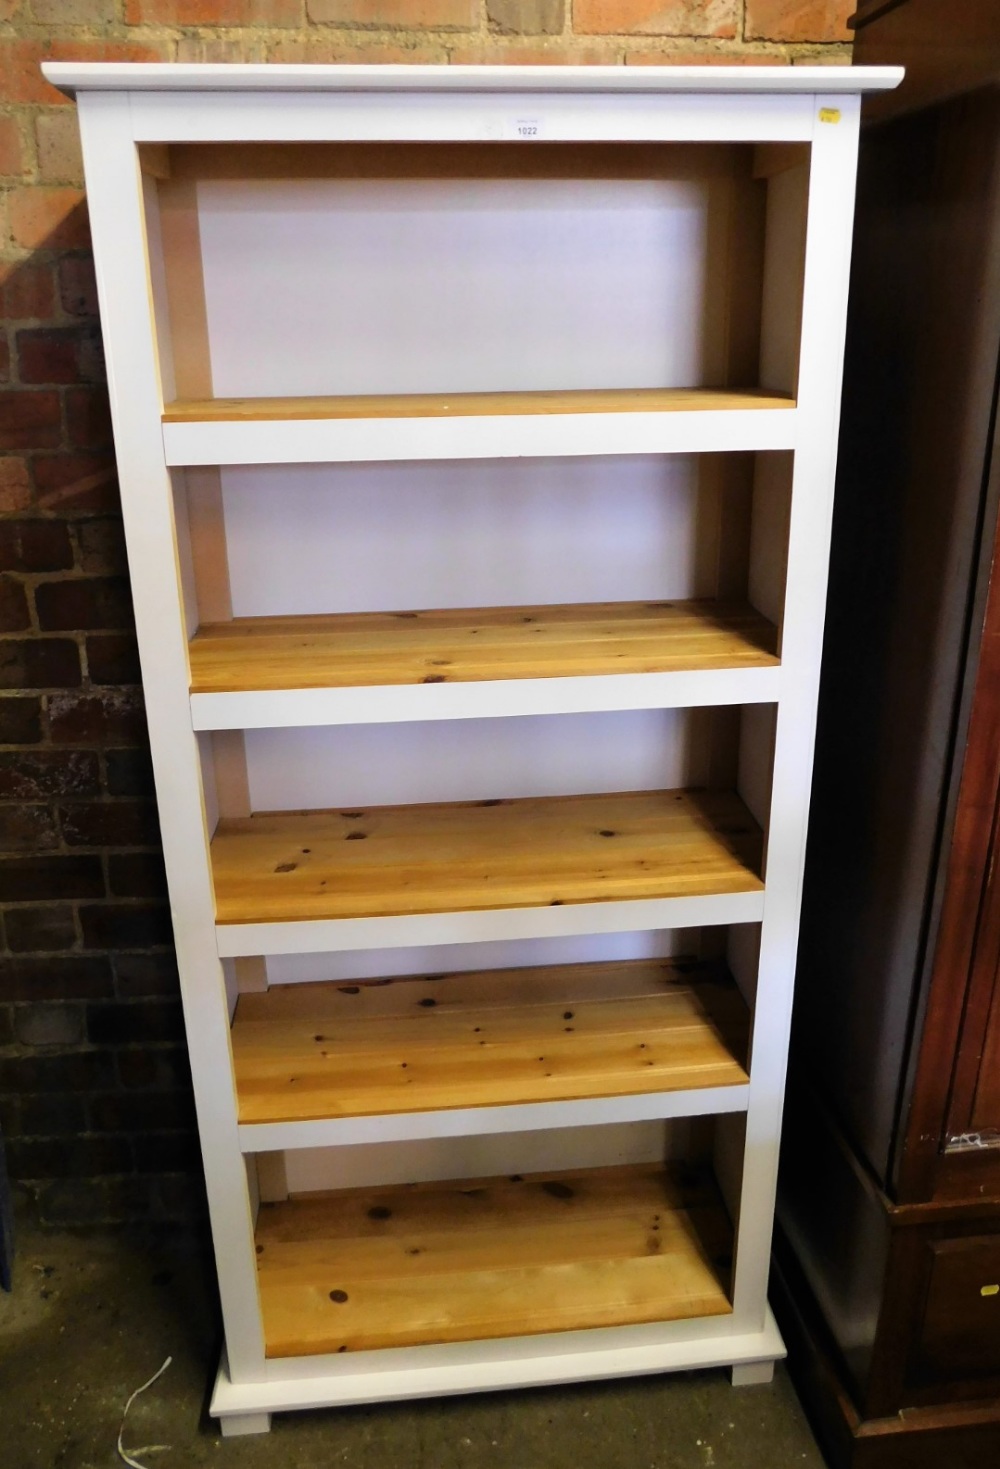 A white painted modern pine bookshelf, with five shelves.